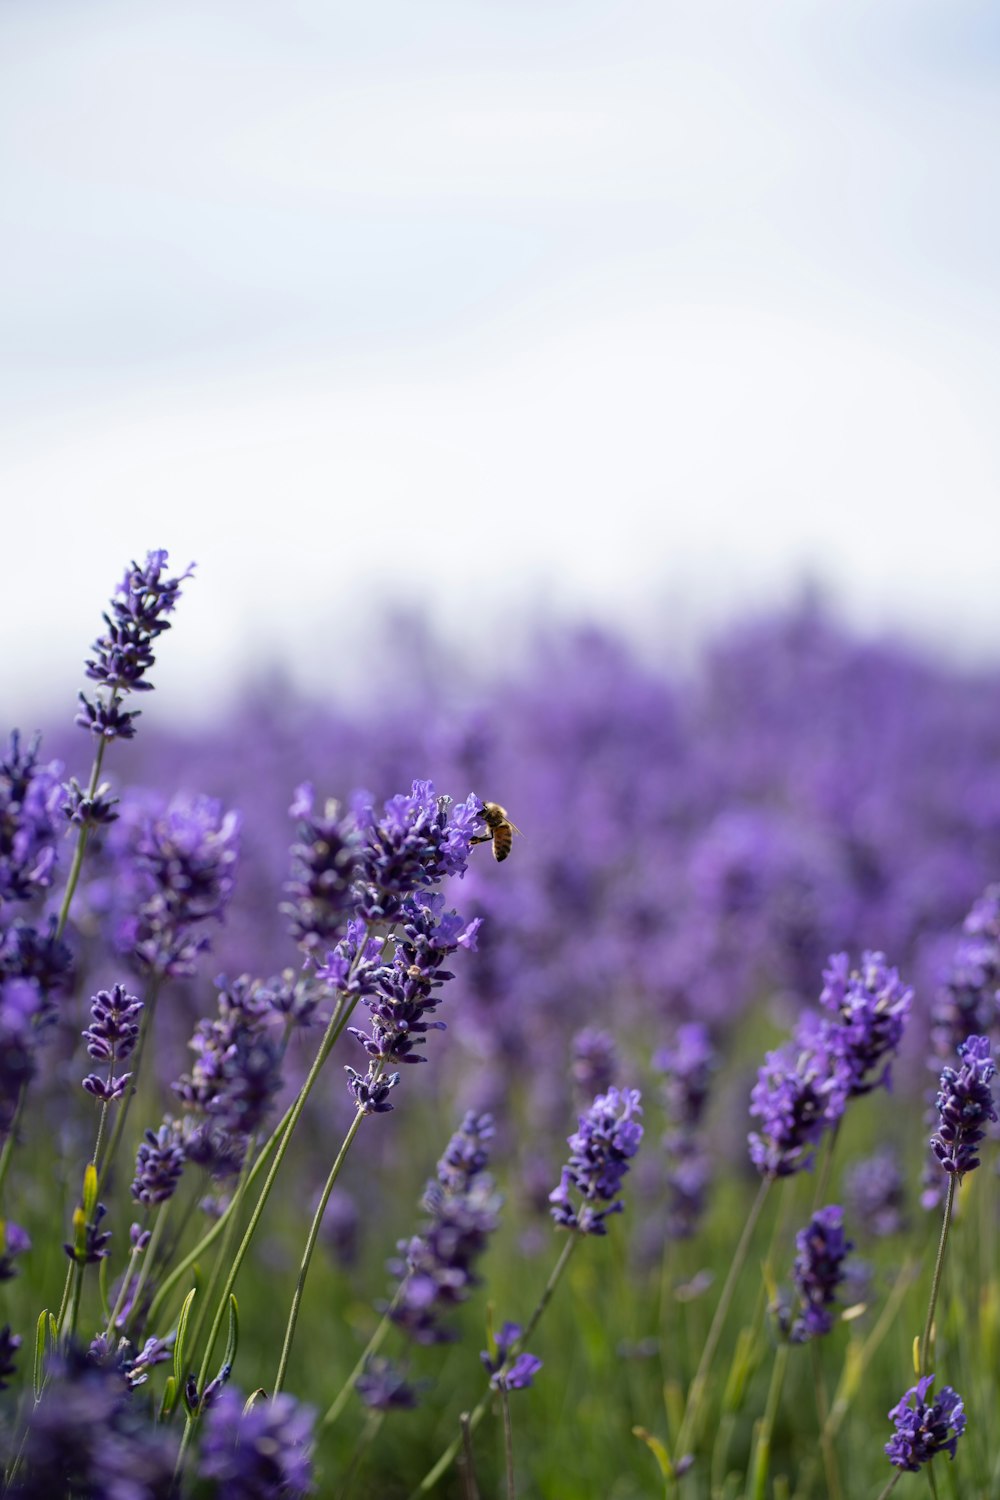 a bee flying over a field of lavender flowers